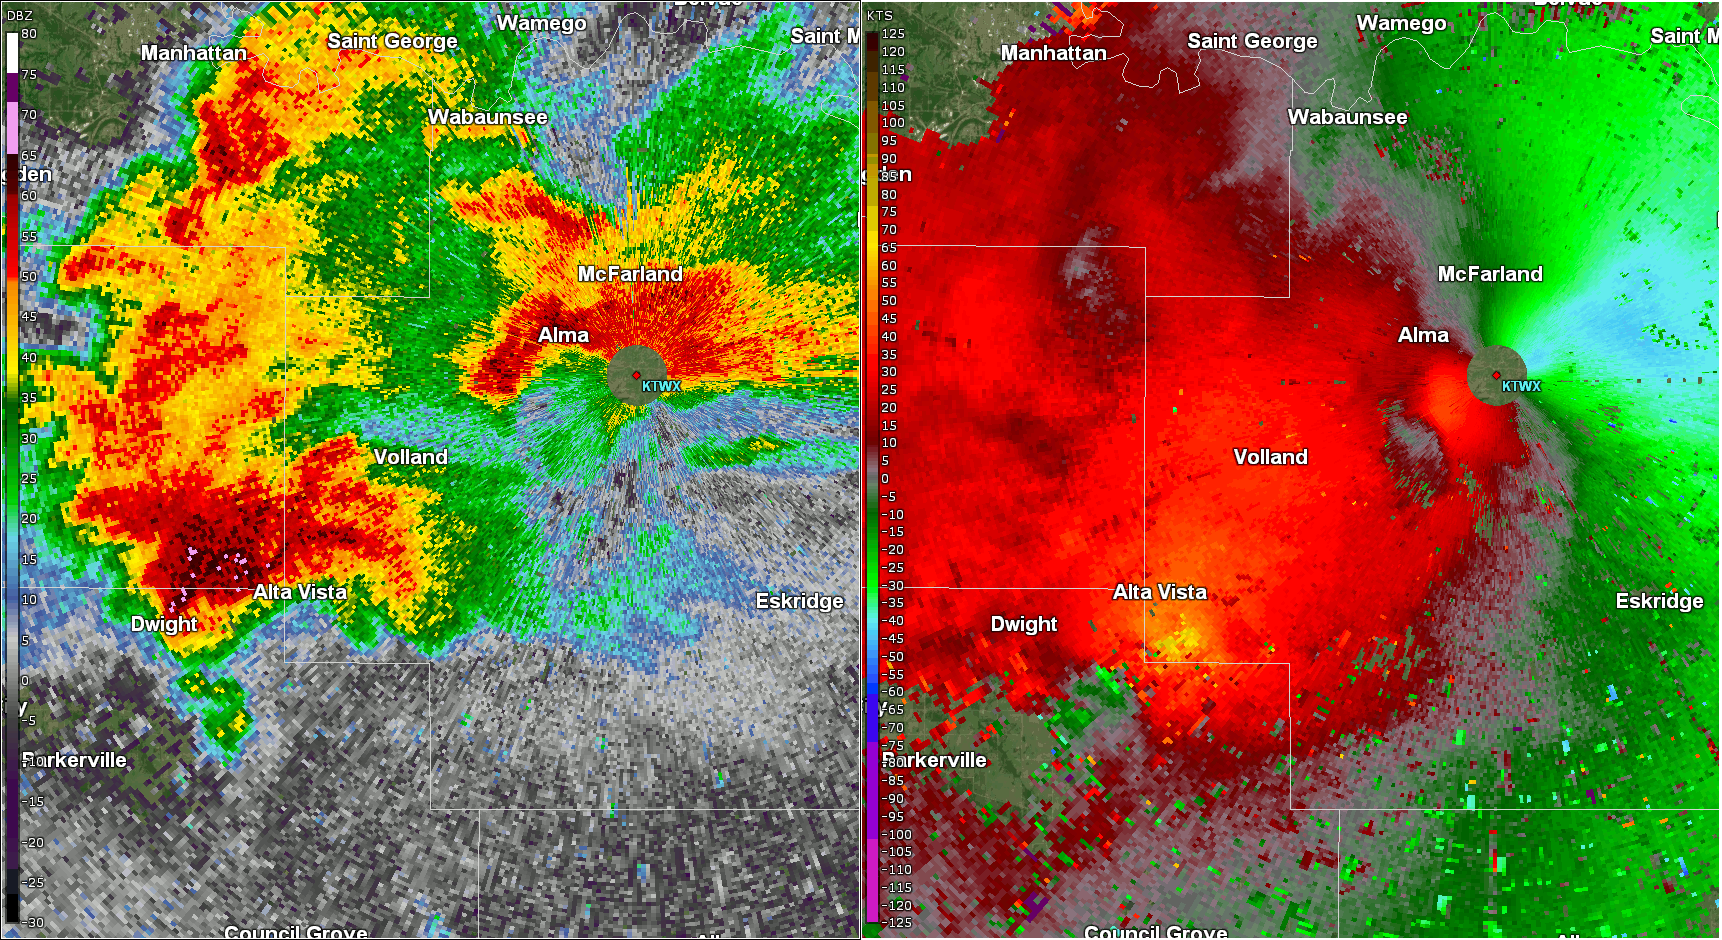 Radar reflectivity and storm relative velocity for the storm in western Wabaunsee County